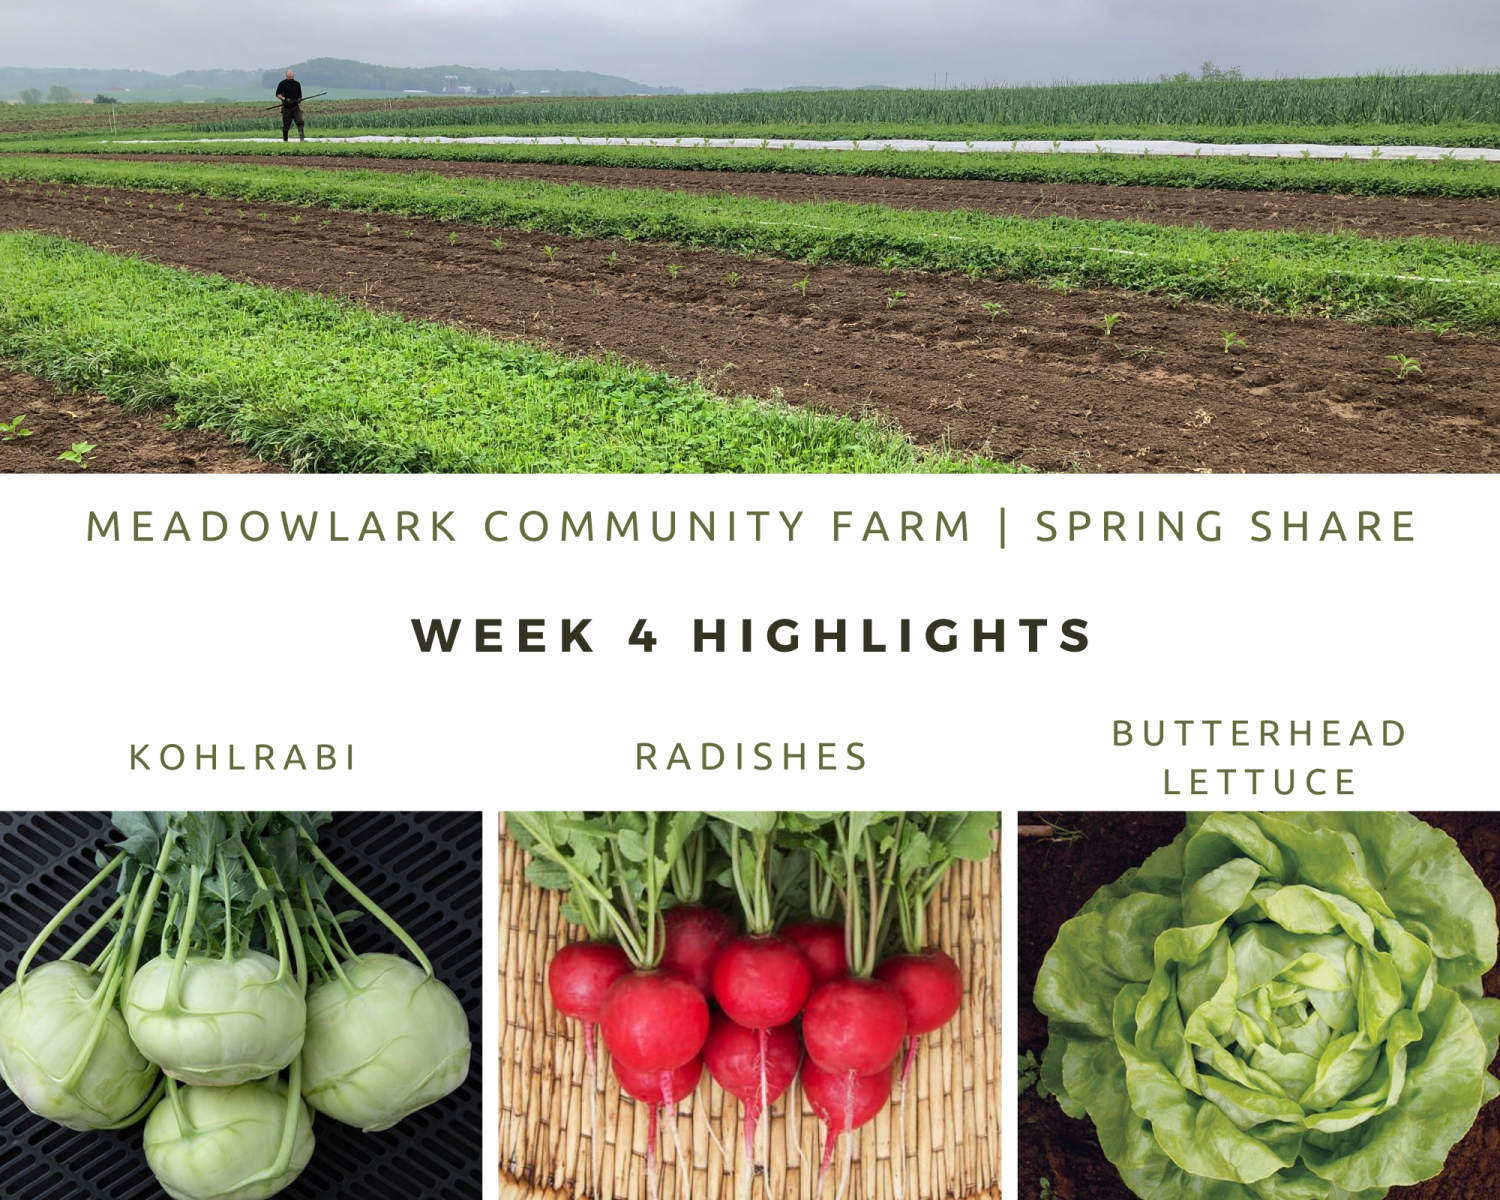 Previous Happening: Spring Share: Week 4